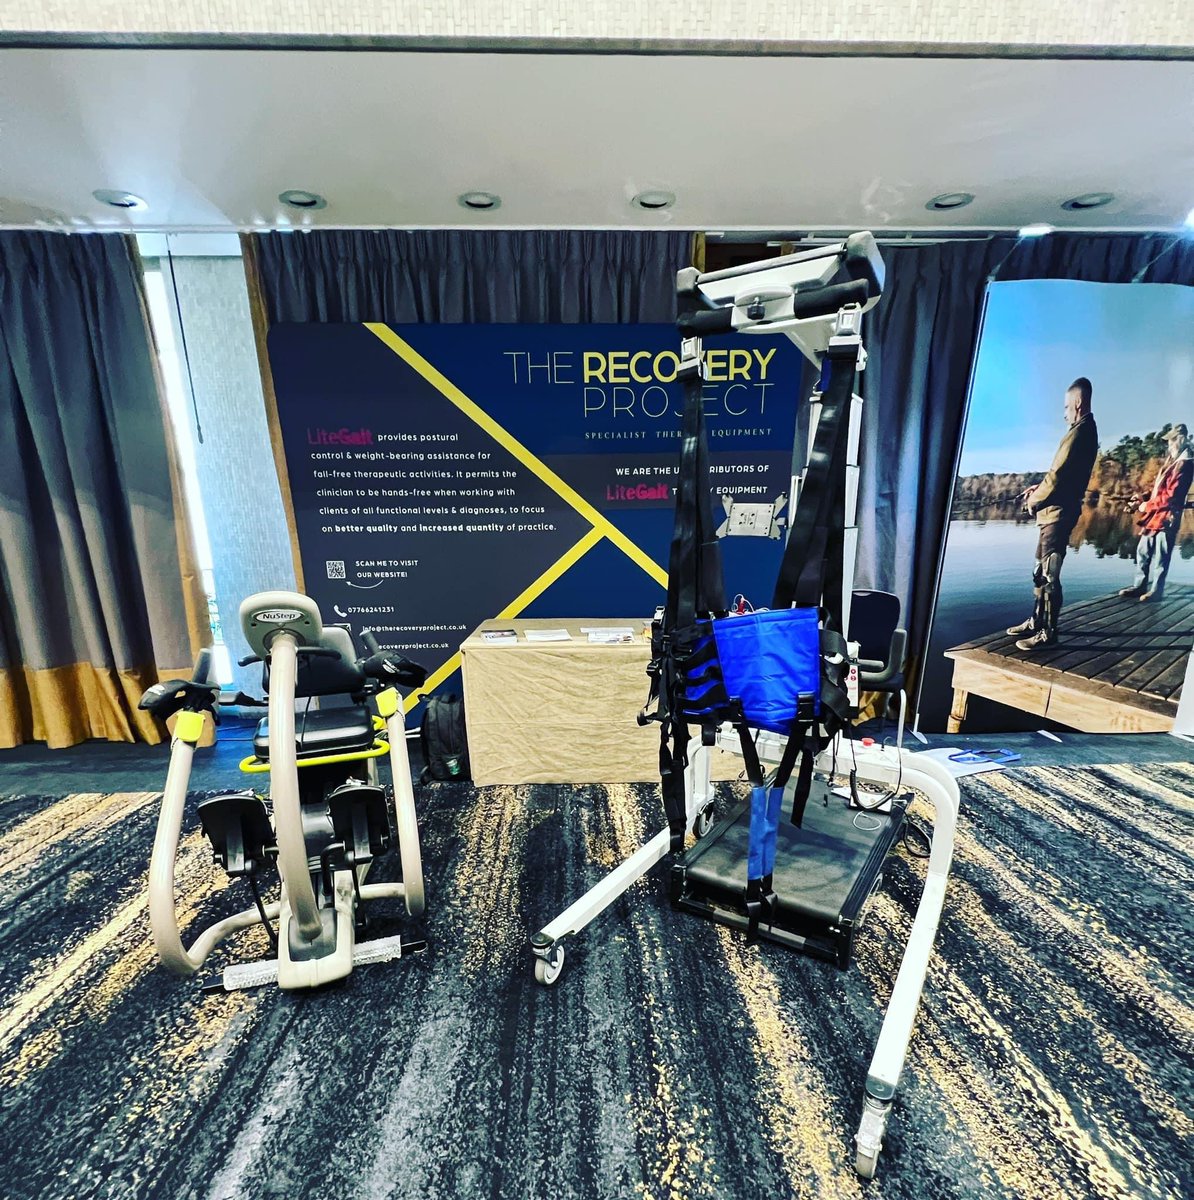 We are all set for the @acpin_EA  conference at the @RCPhysicians today! If you are attending, come and say hello!

#acpin2022 #litegaittherapy #nustep #neurologicalrehabilitation #physiotherapy